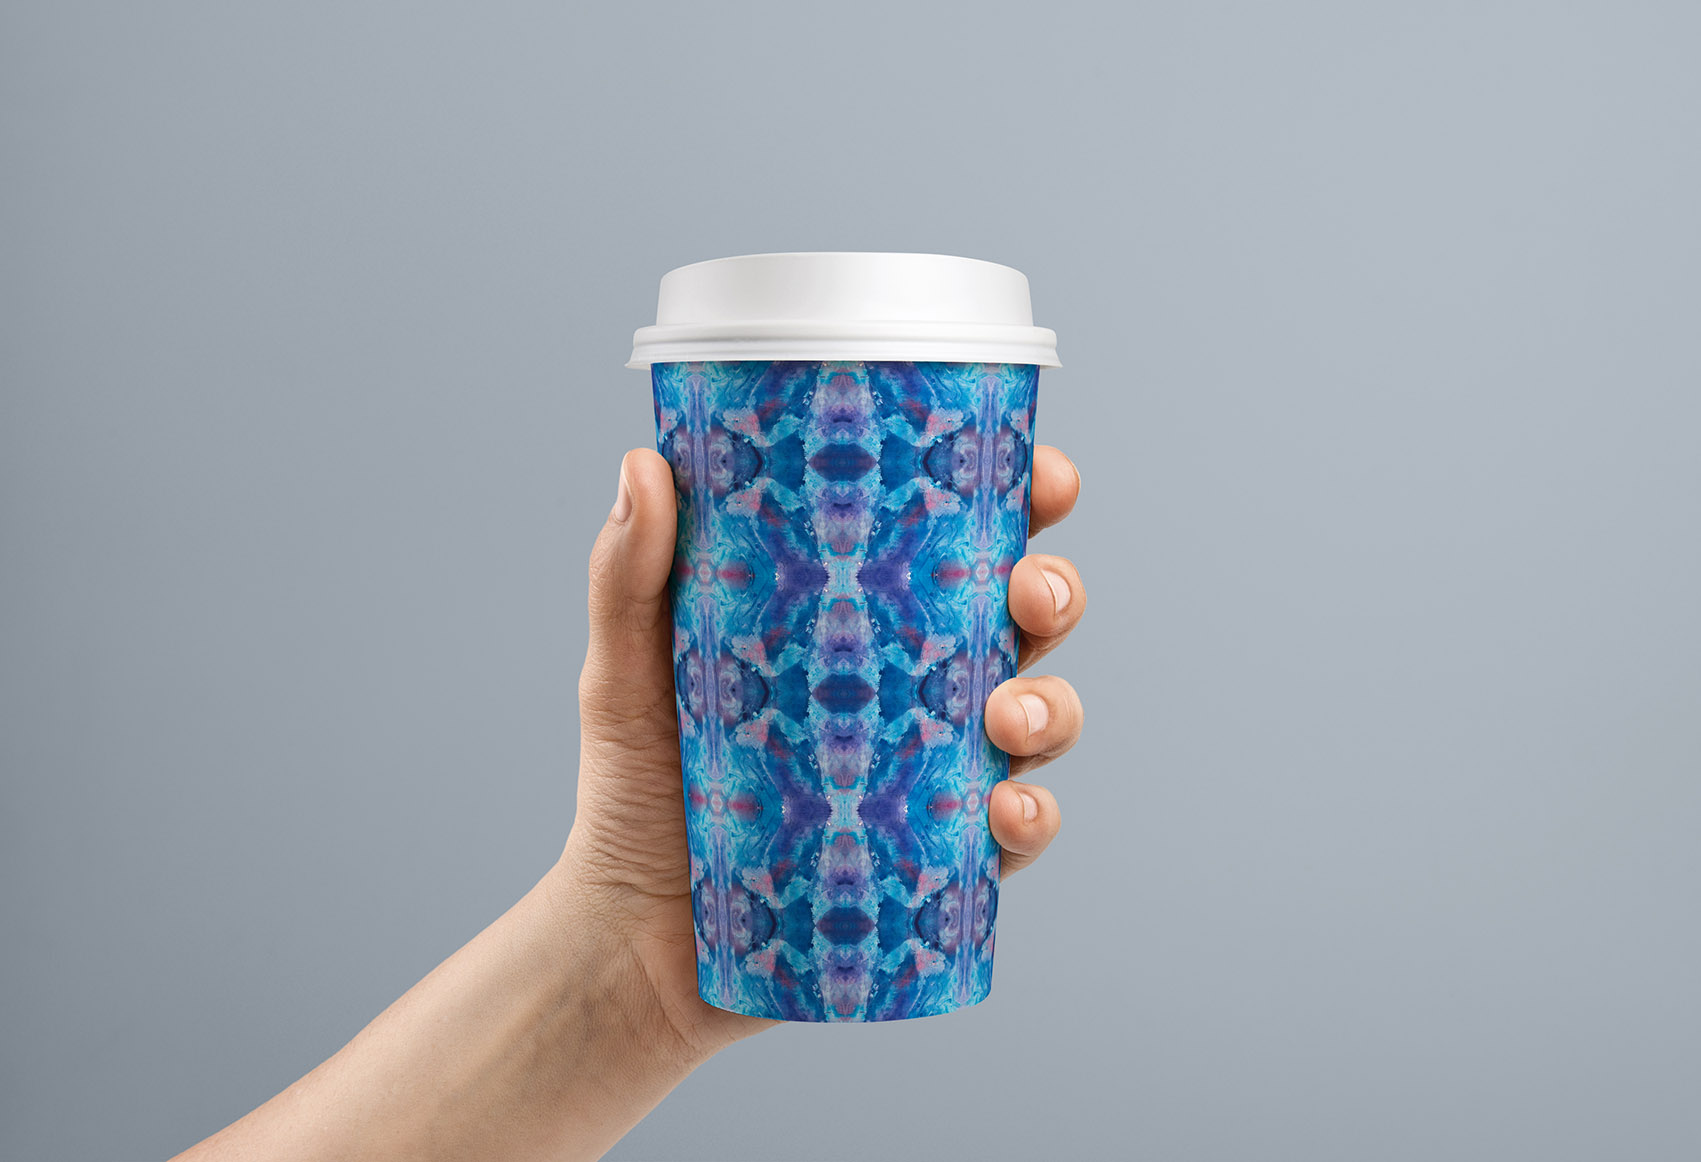 Abstract Watercolor Fractal Pattern coffee cup.